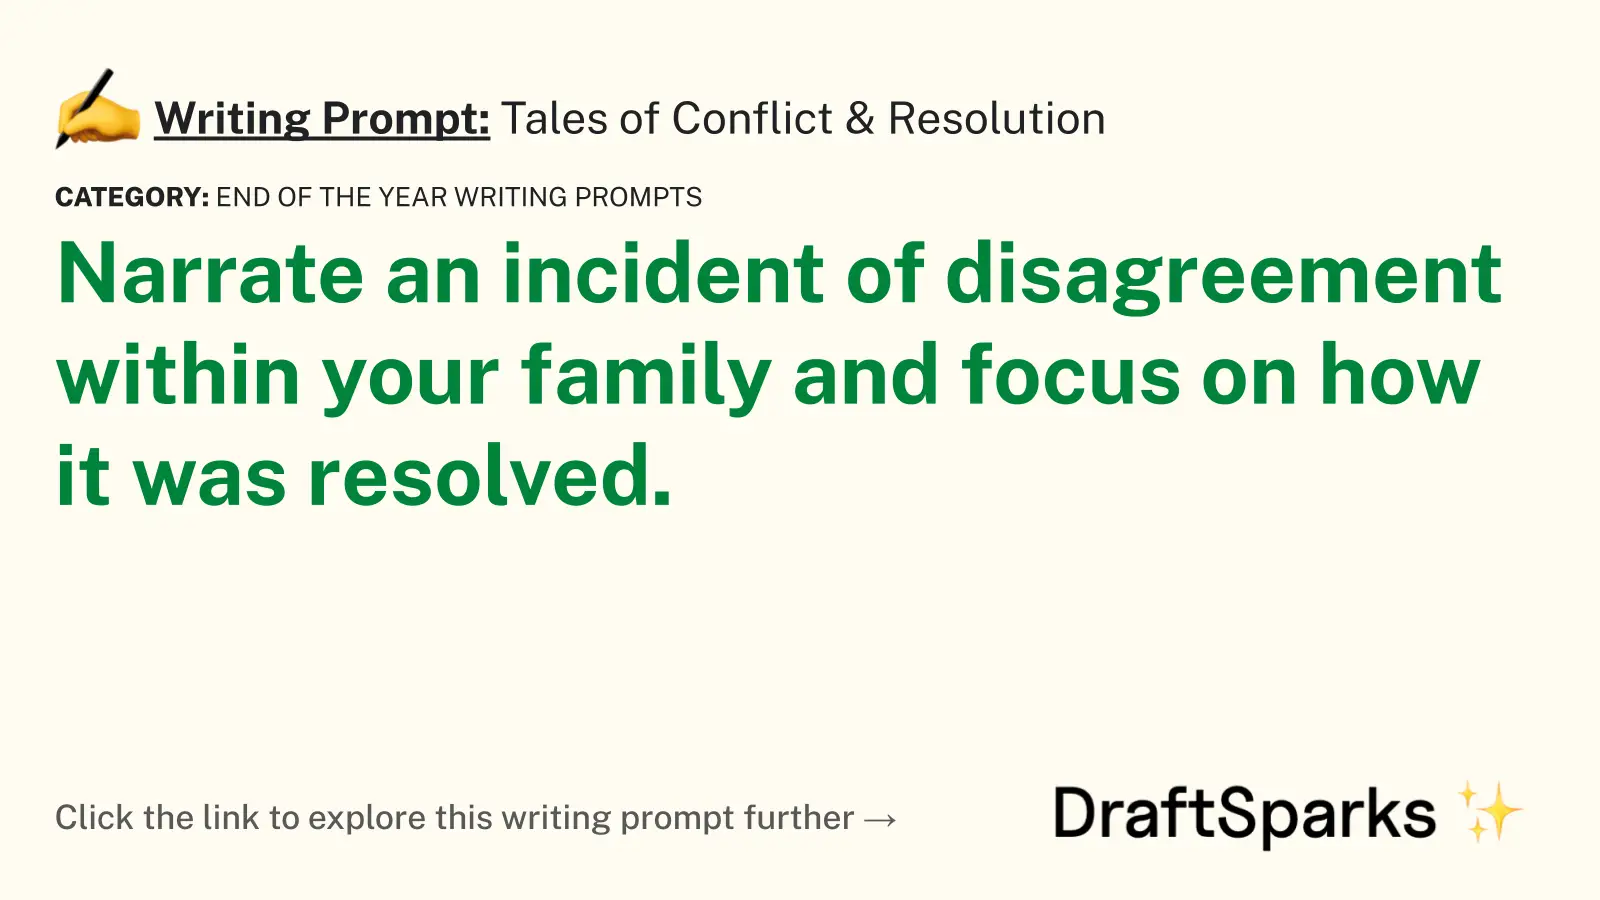 Tales of Conflict & Resolution